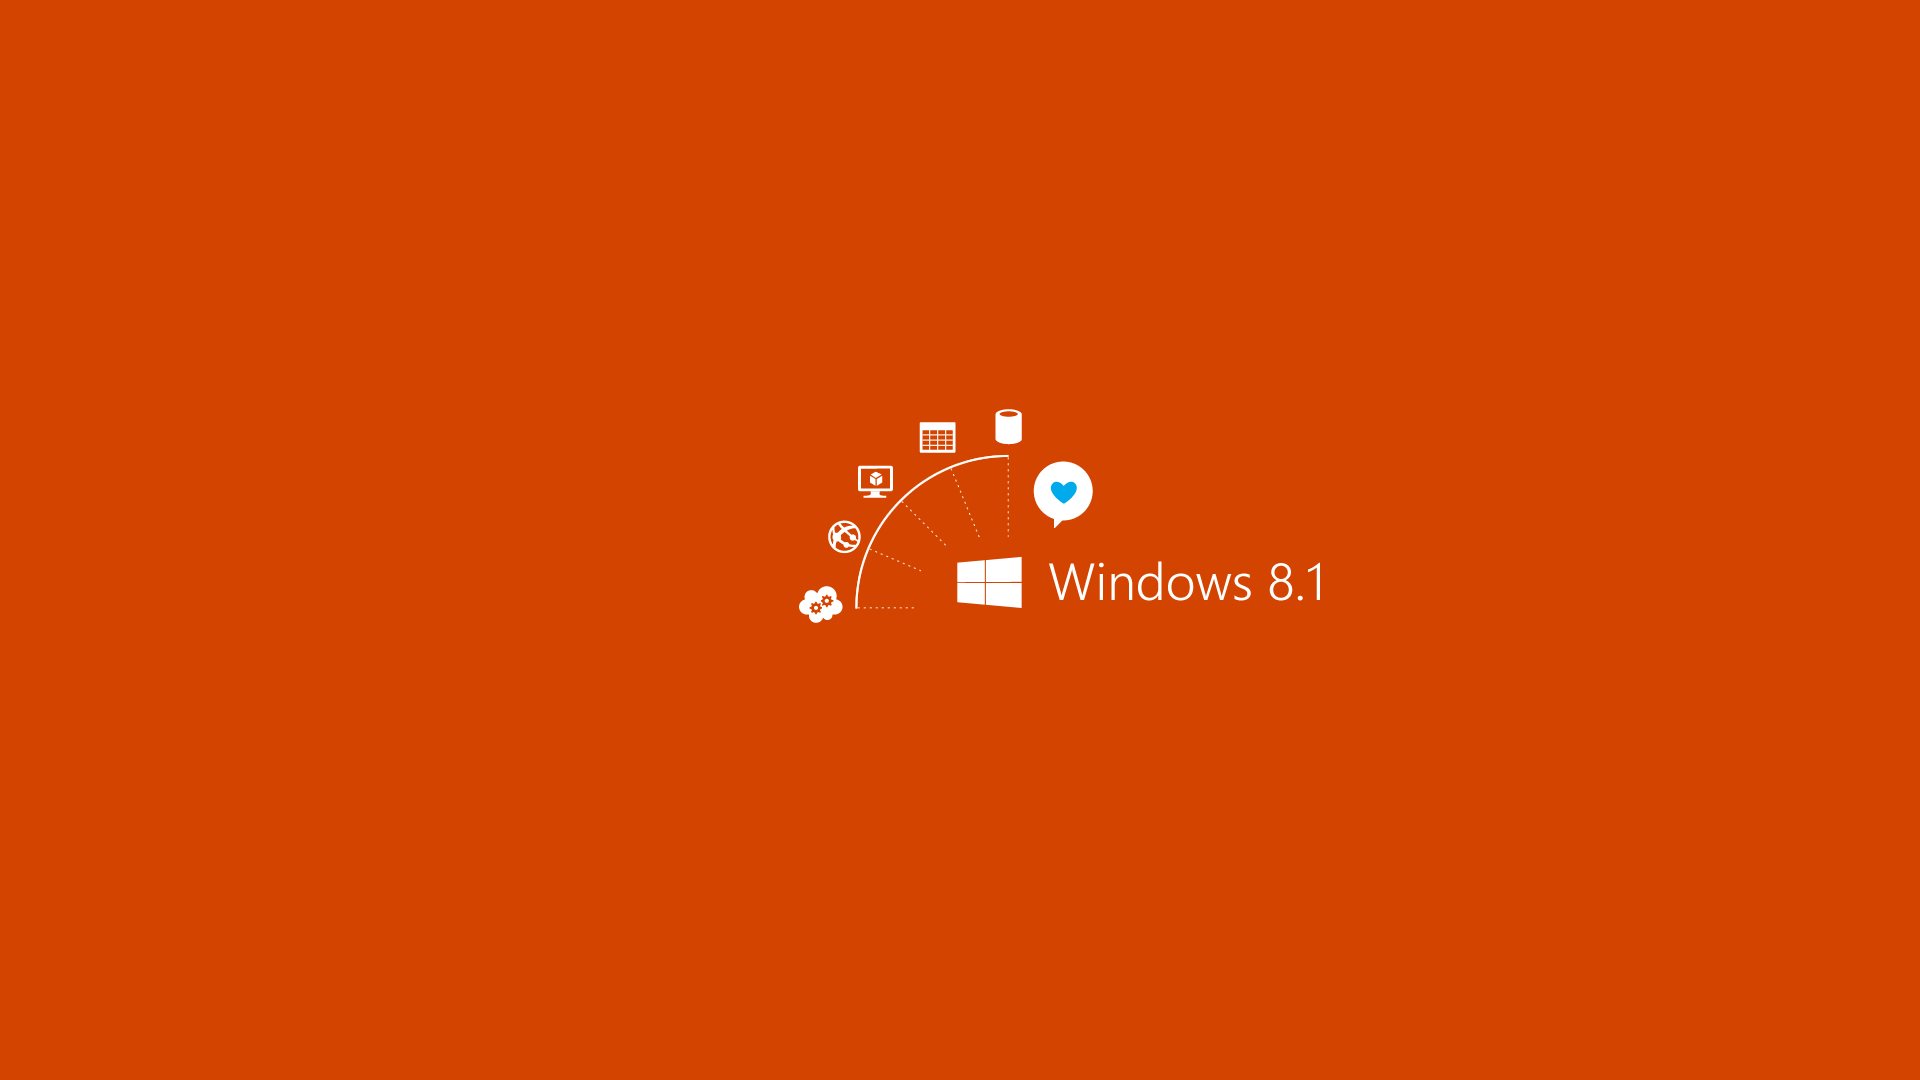 5 Windows 8.1 HD Wallpapers Backgrounds - Wallpaper Abyss